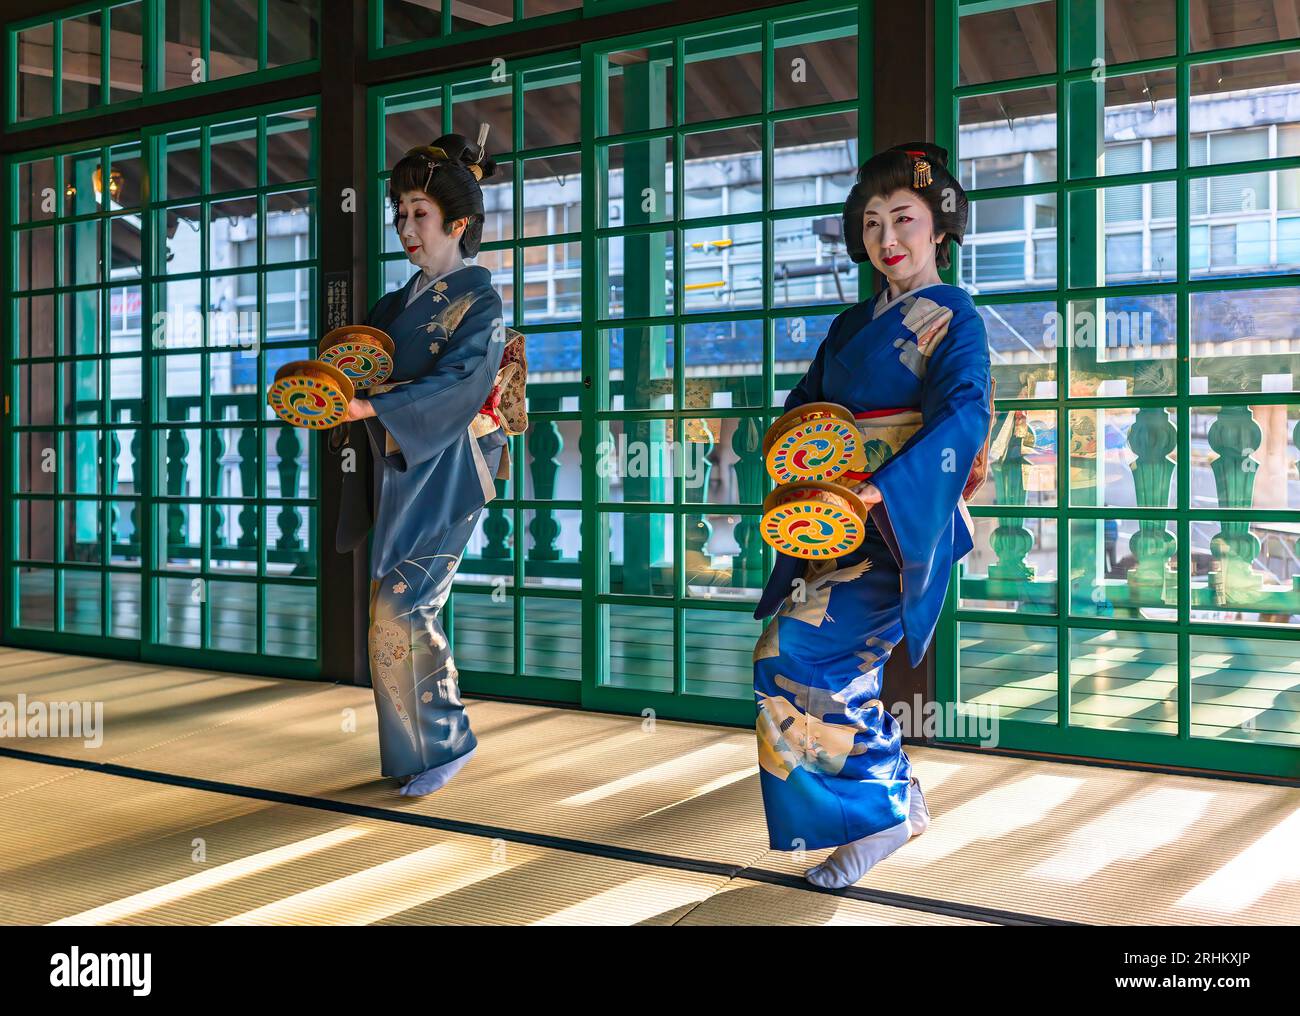 nagasaki, kyushu - dec 14 2022: Free event featuring two Japanese middle age women wearing kimono and holding furi-dutsumi tambourines in the First Sh Stock Photo